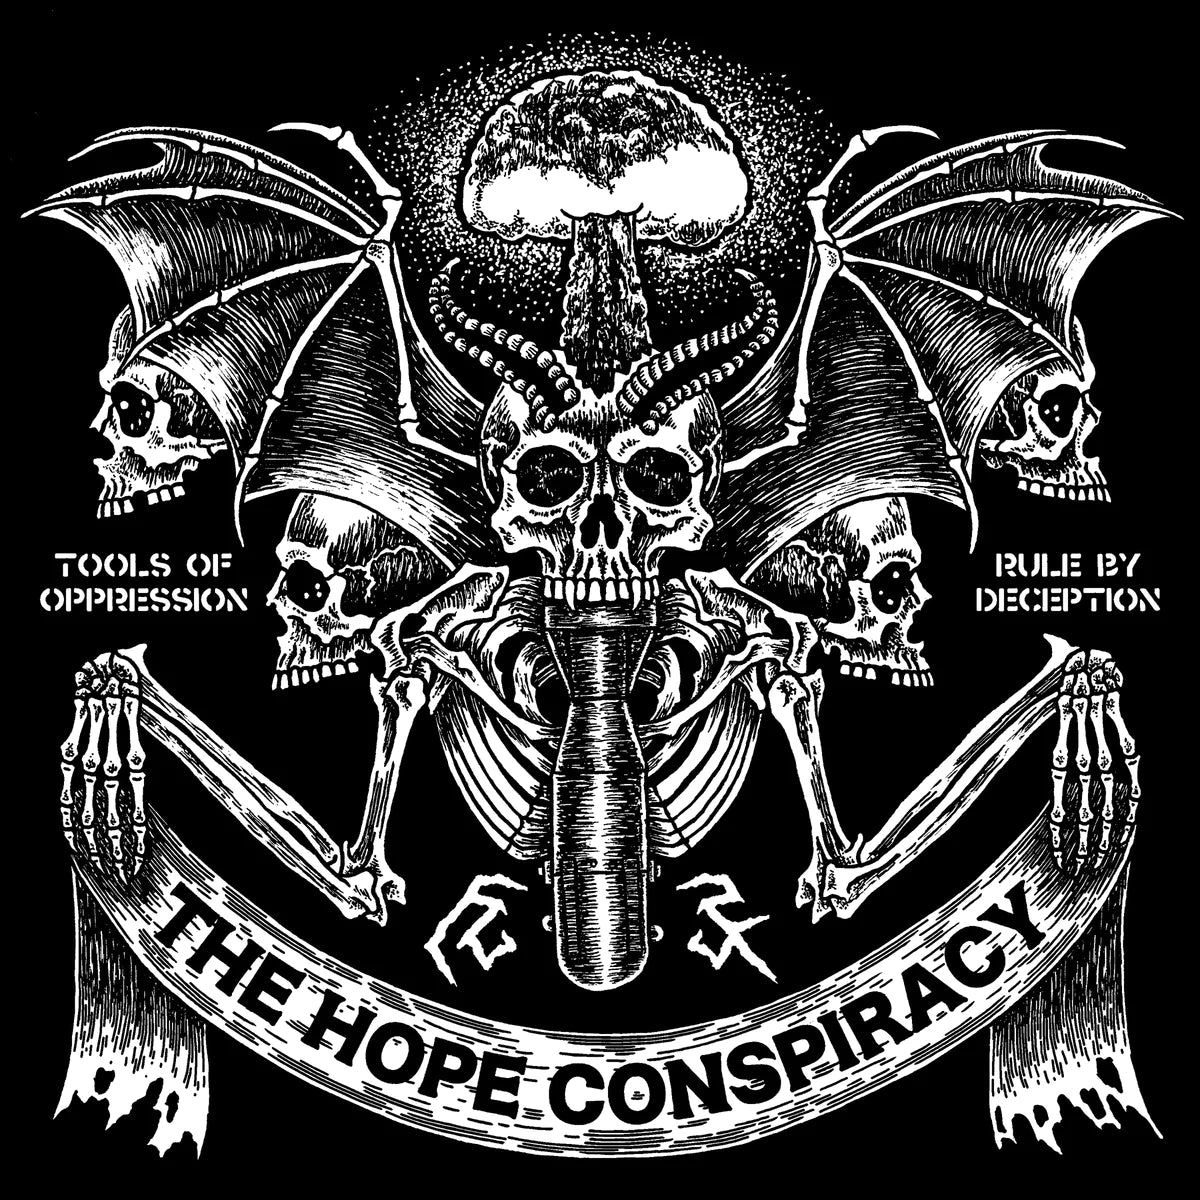 THE HOPE CONSPIRACY "Tools Of Oppression/Rule By Deception" Tape